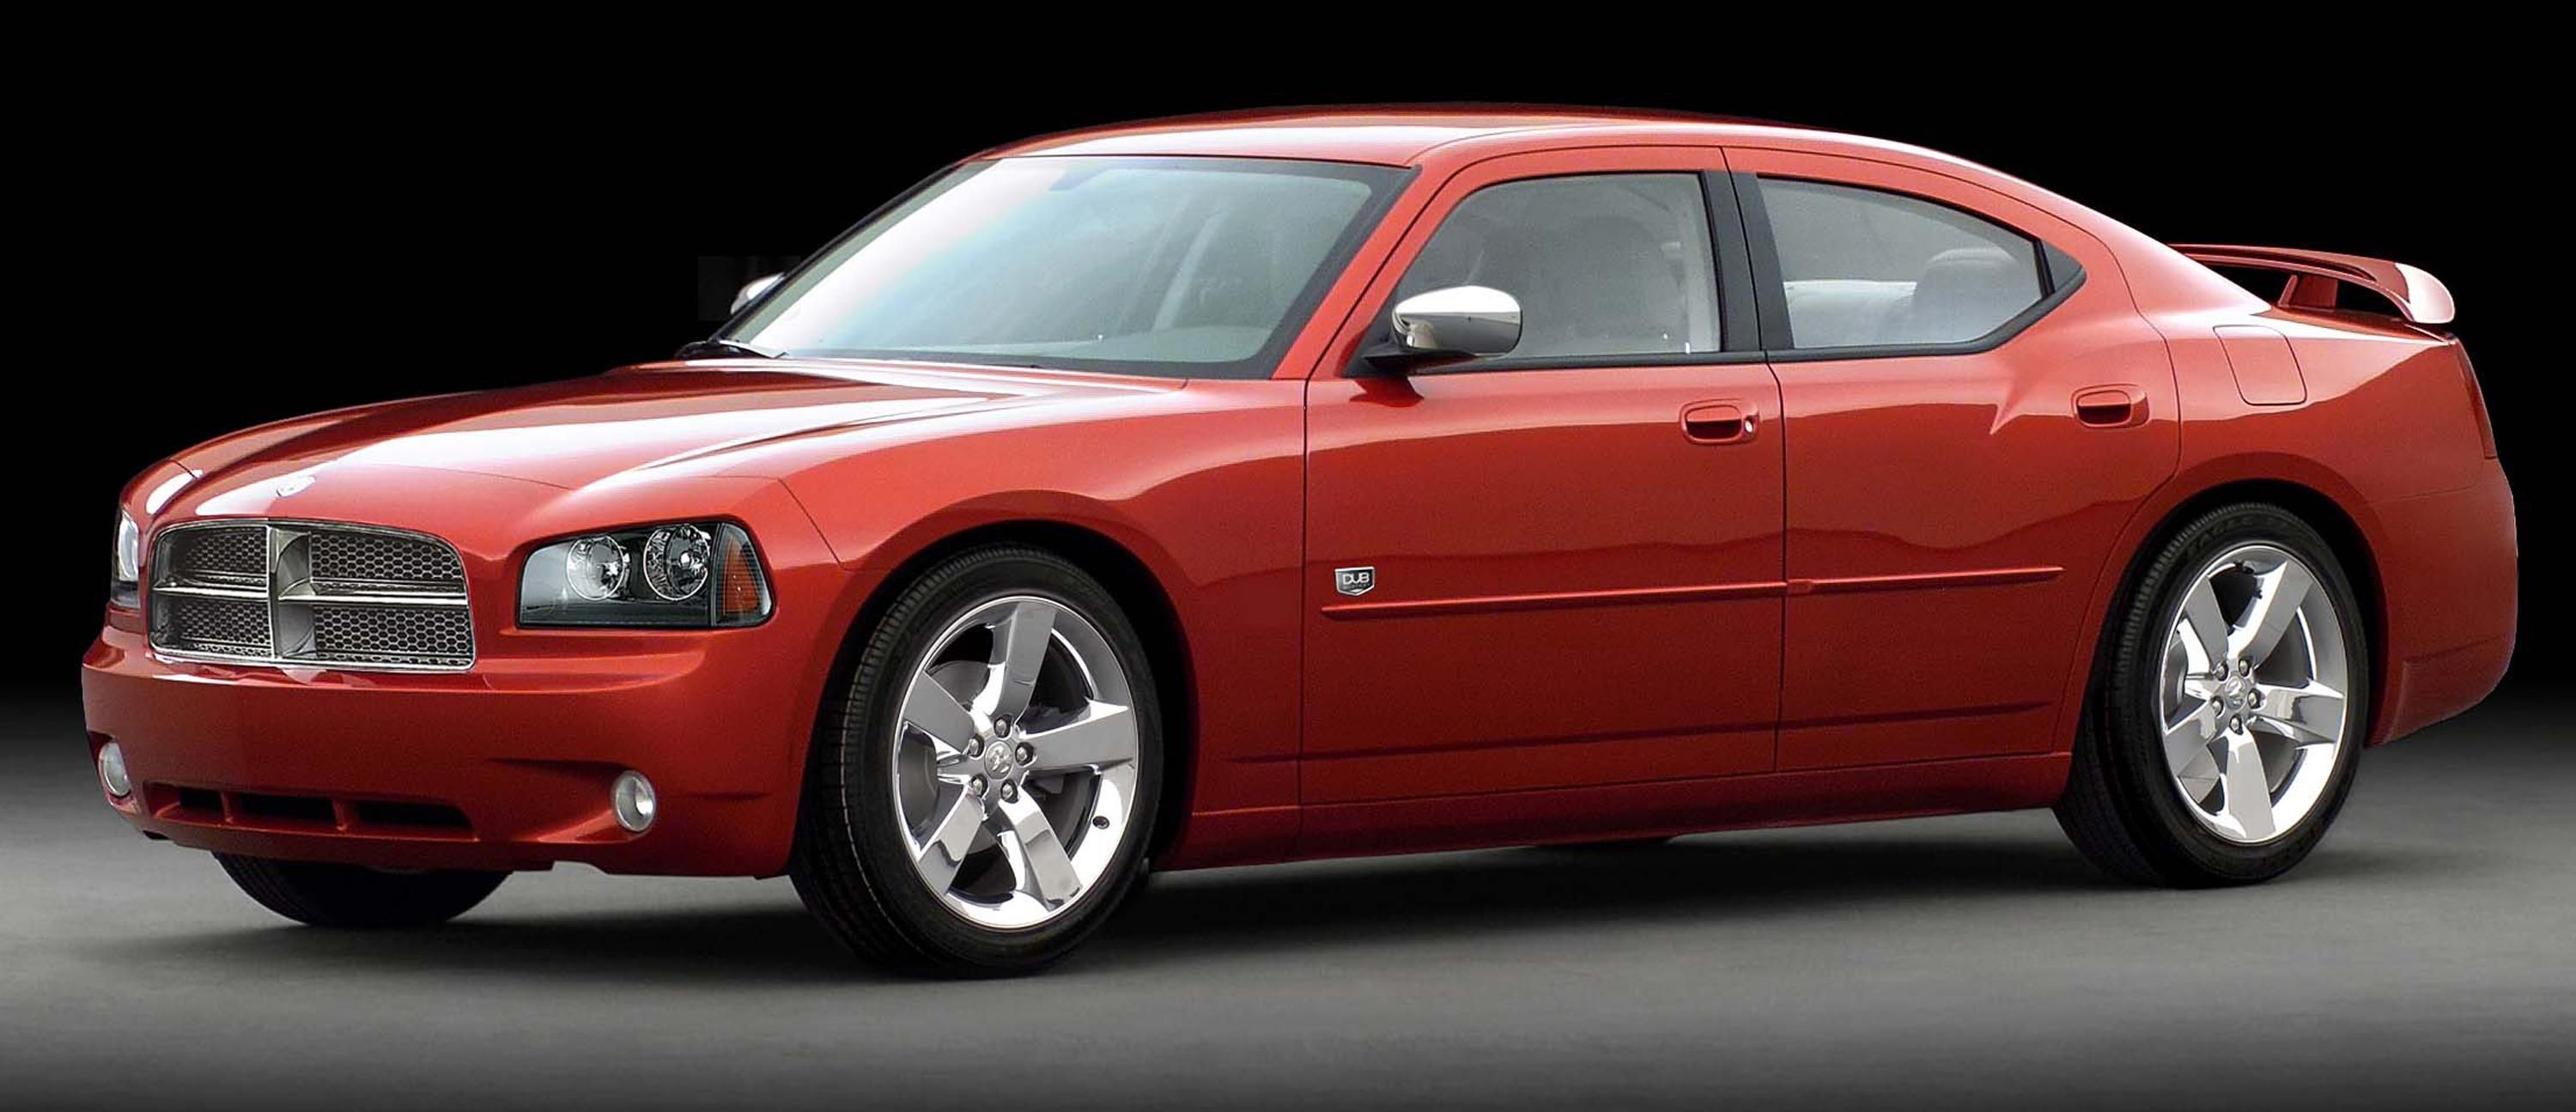 2008 Chrysler 300 and Dodge Charger DUB Edition